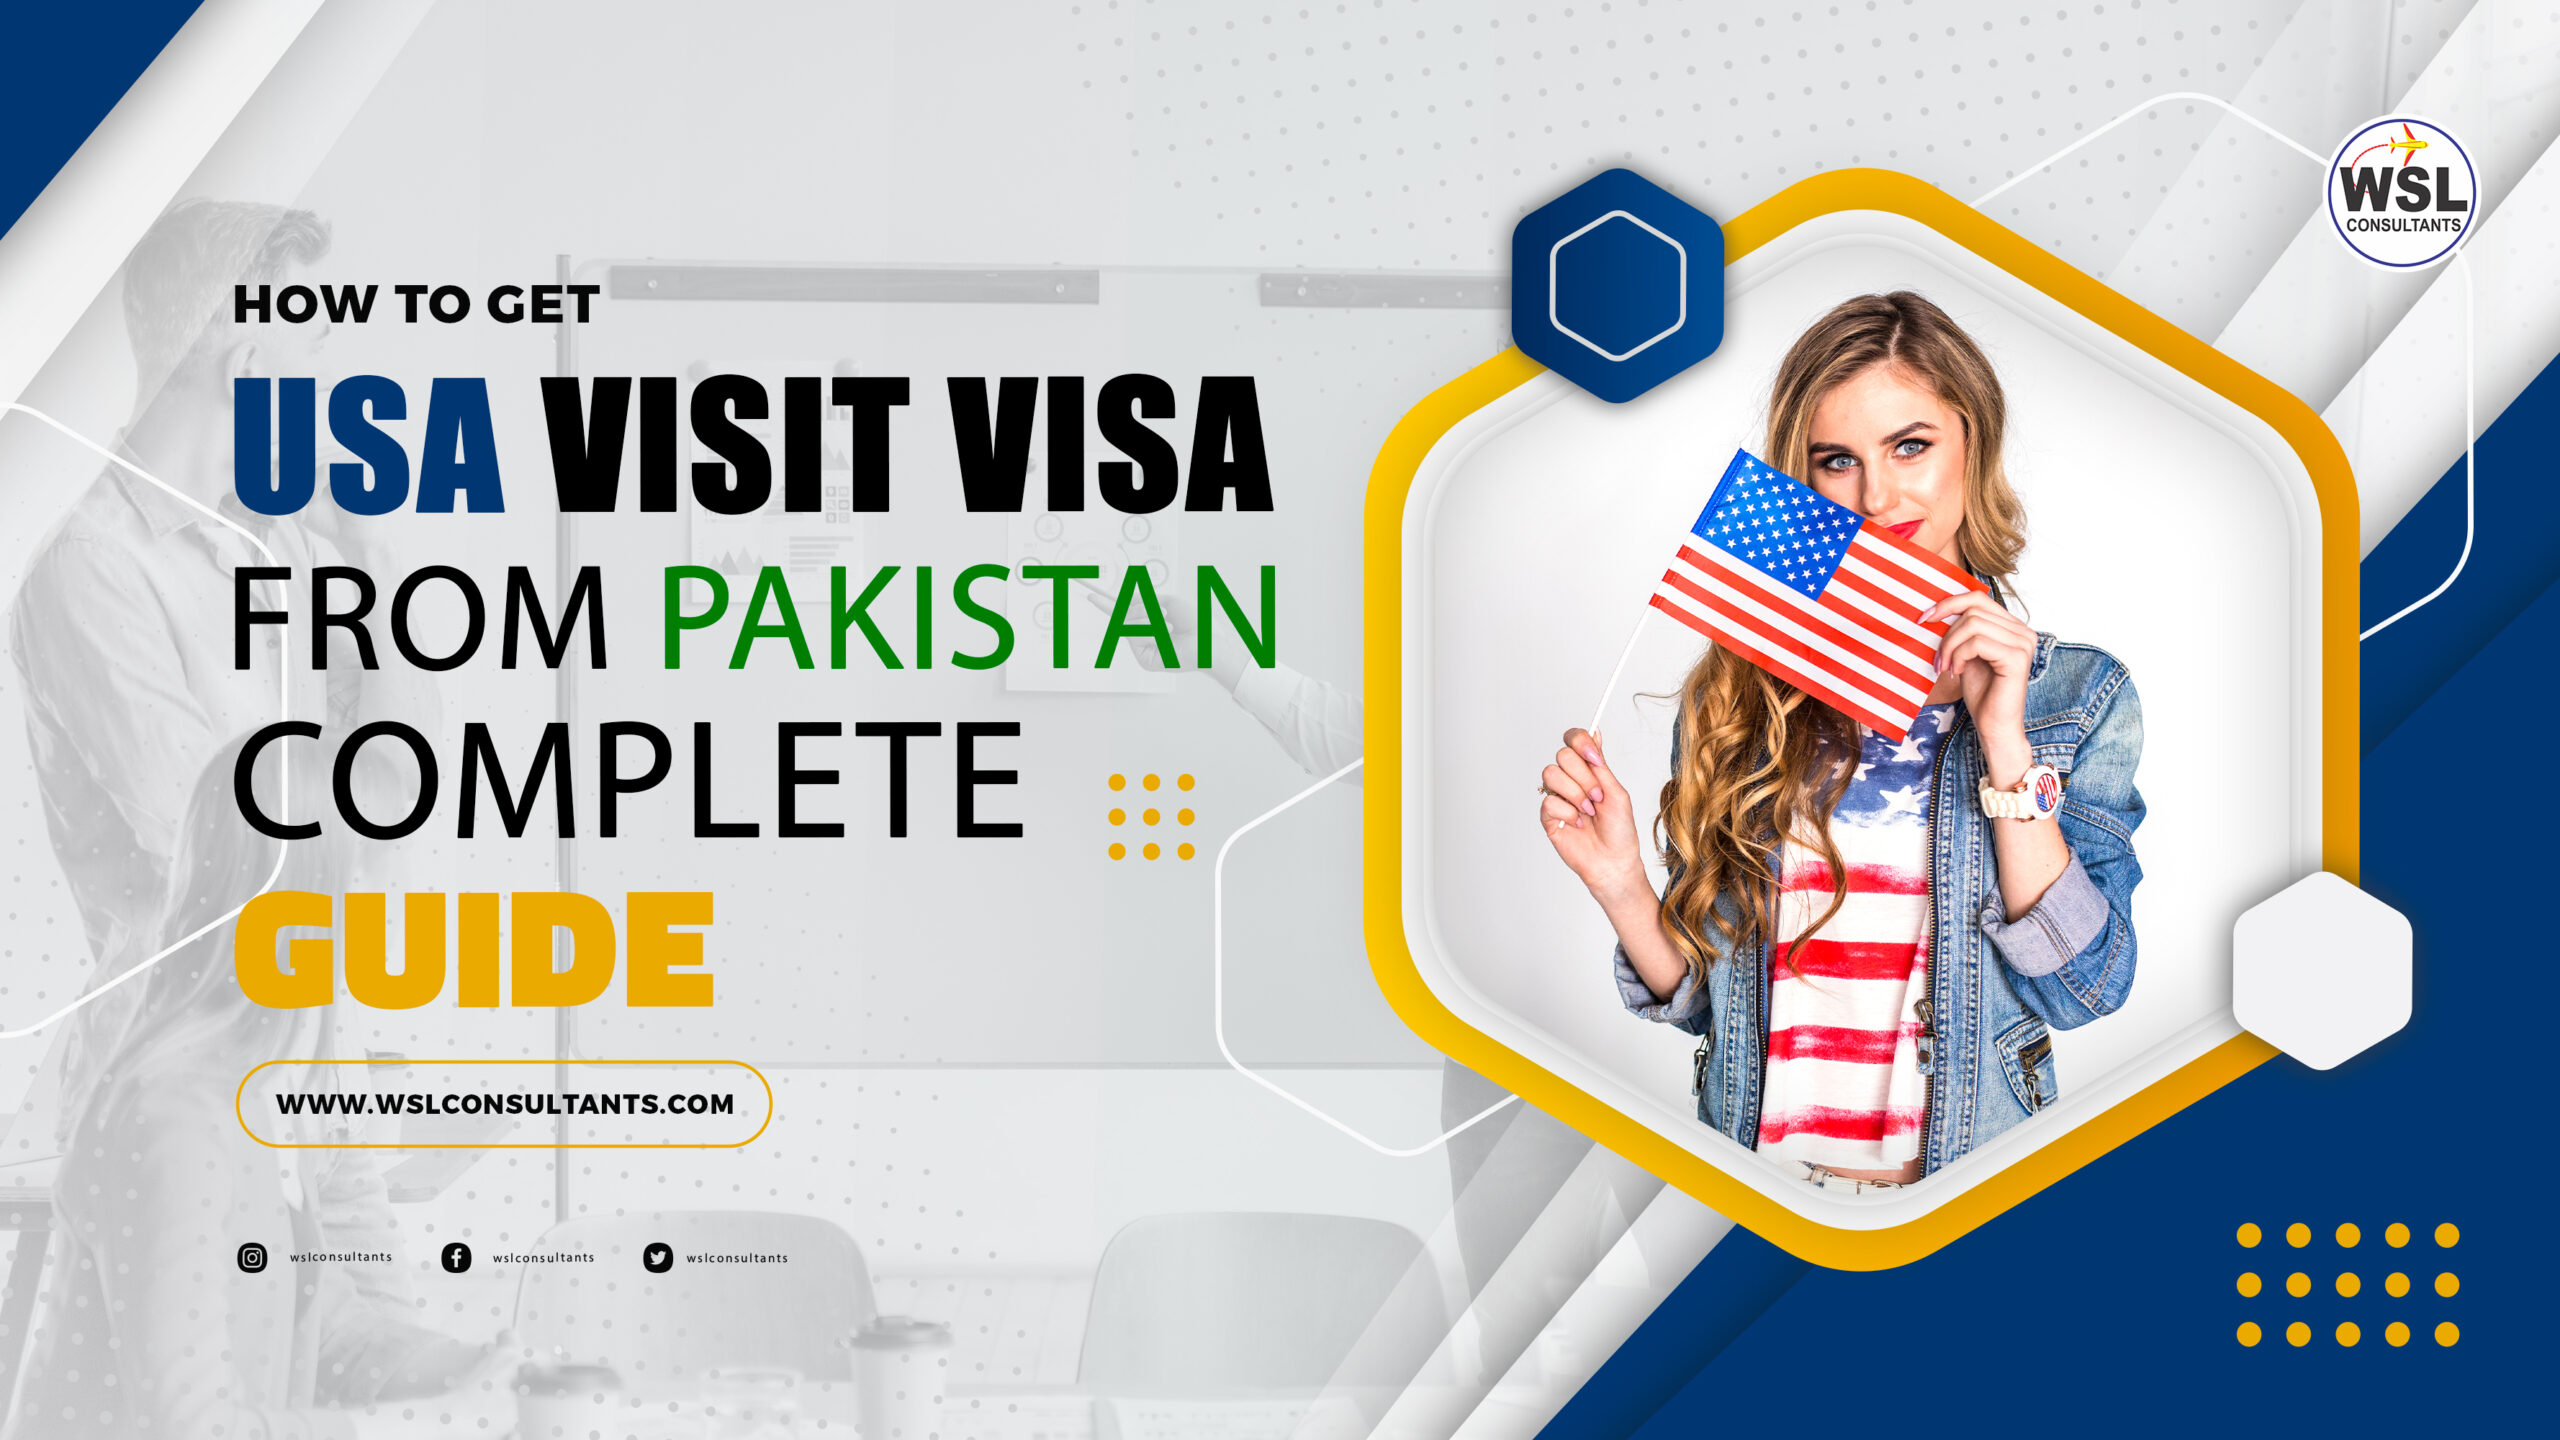 How to get USA visit visa from Pakistan Guide